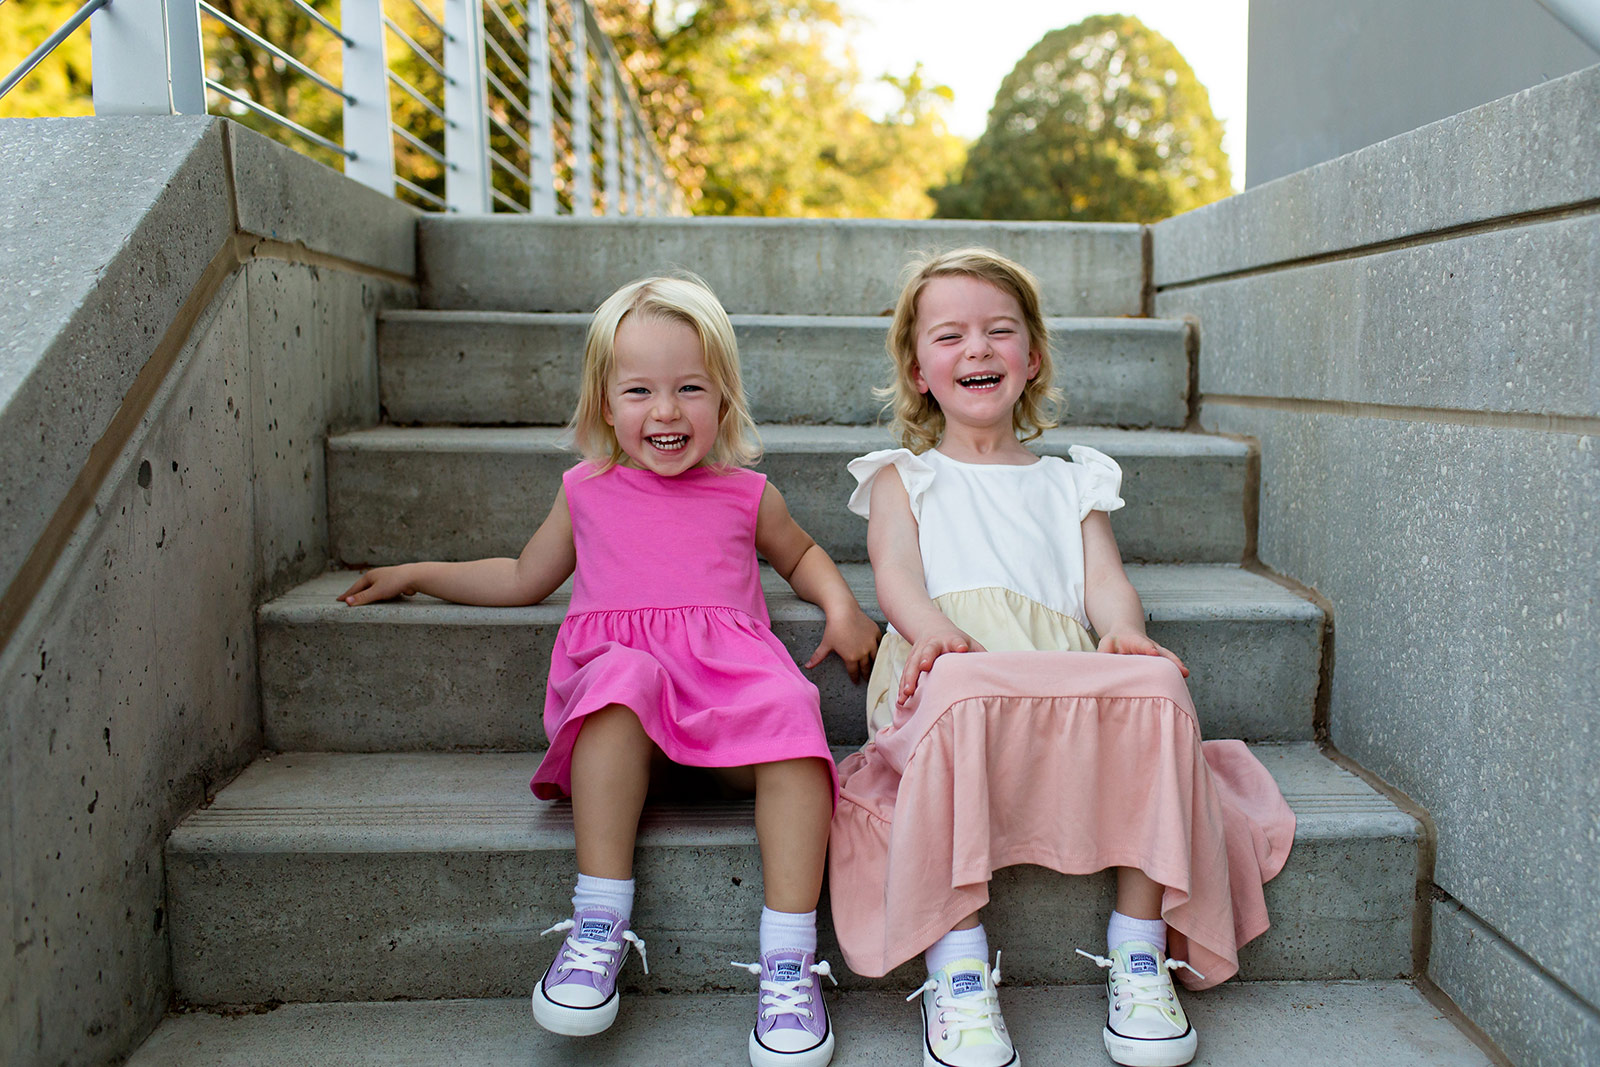 The sisters sit together on a staircase giggling.